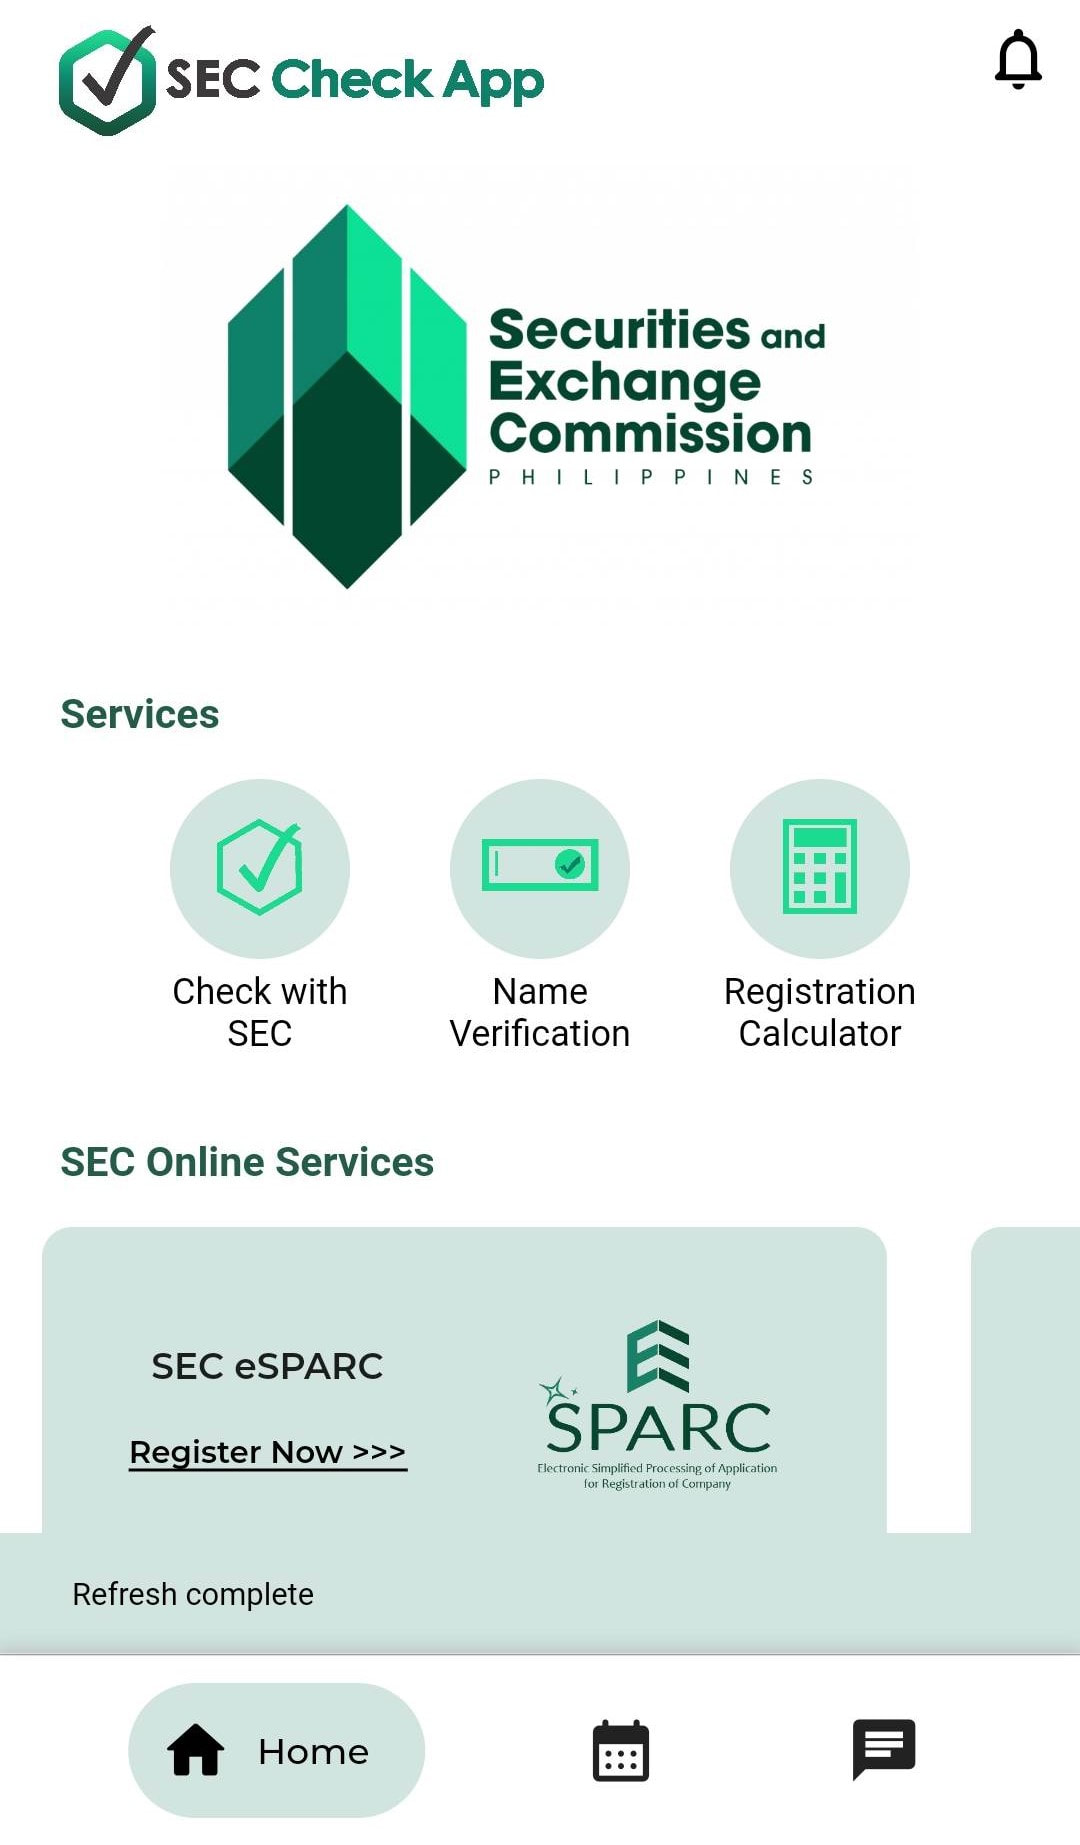 What's new in the SEC Check App